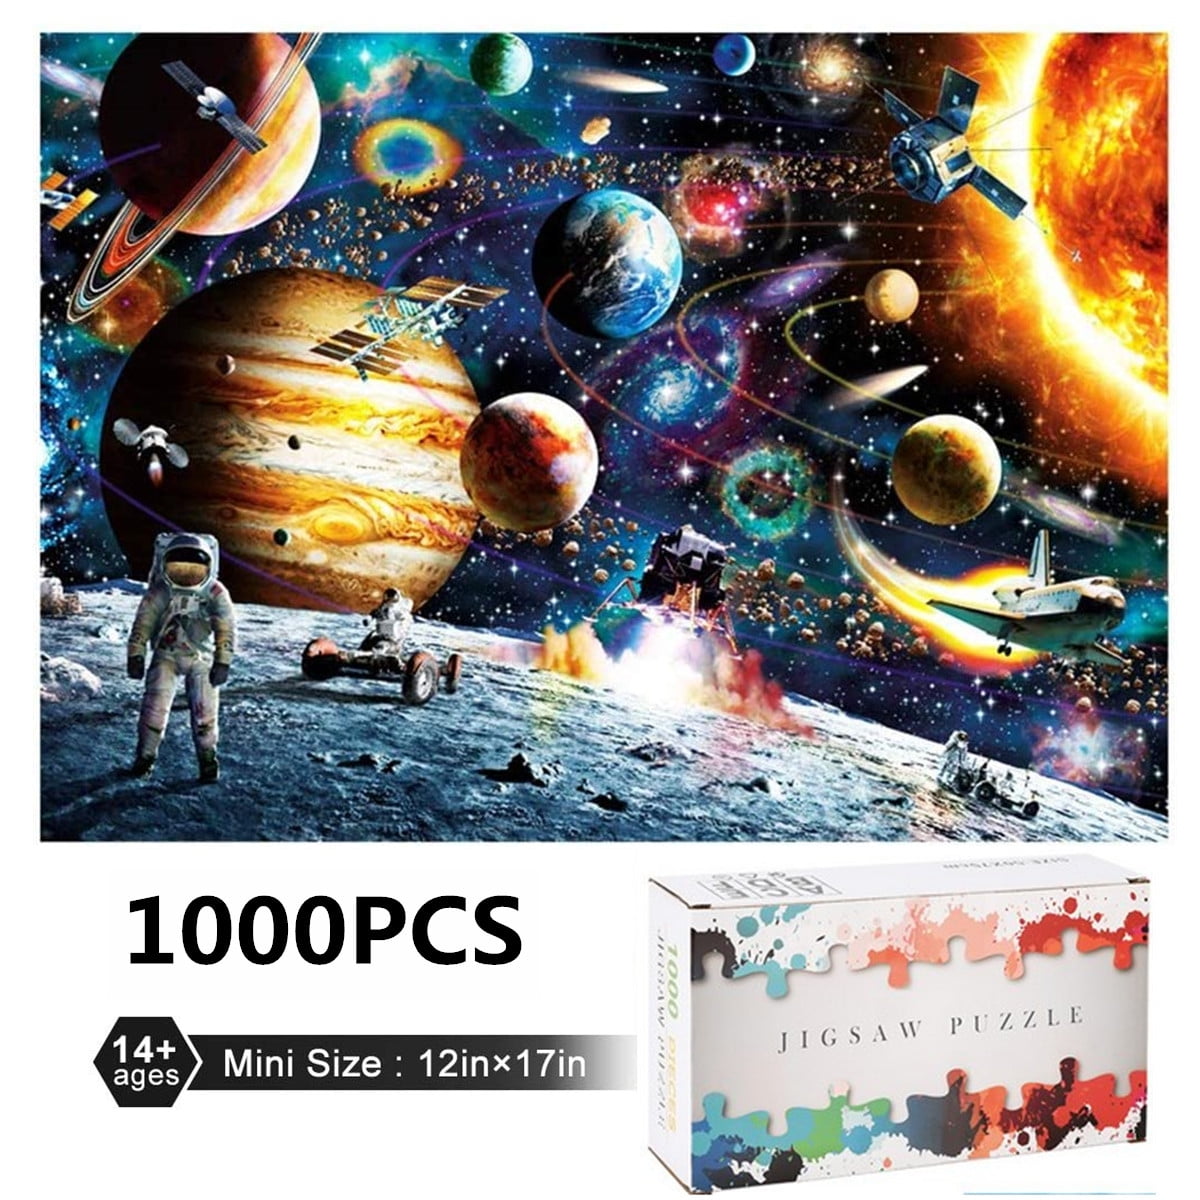 1000 Piece Mini Jigsaw Puzzle for Adults Kids Family Educational Challenge Game 